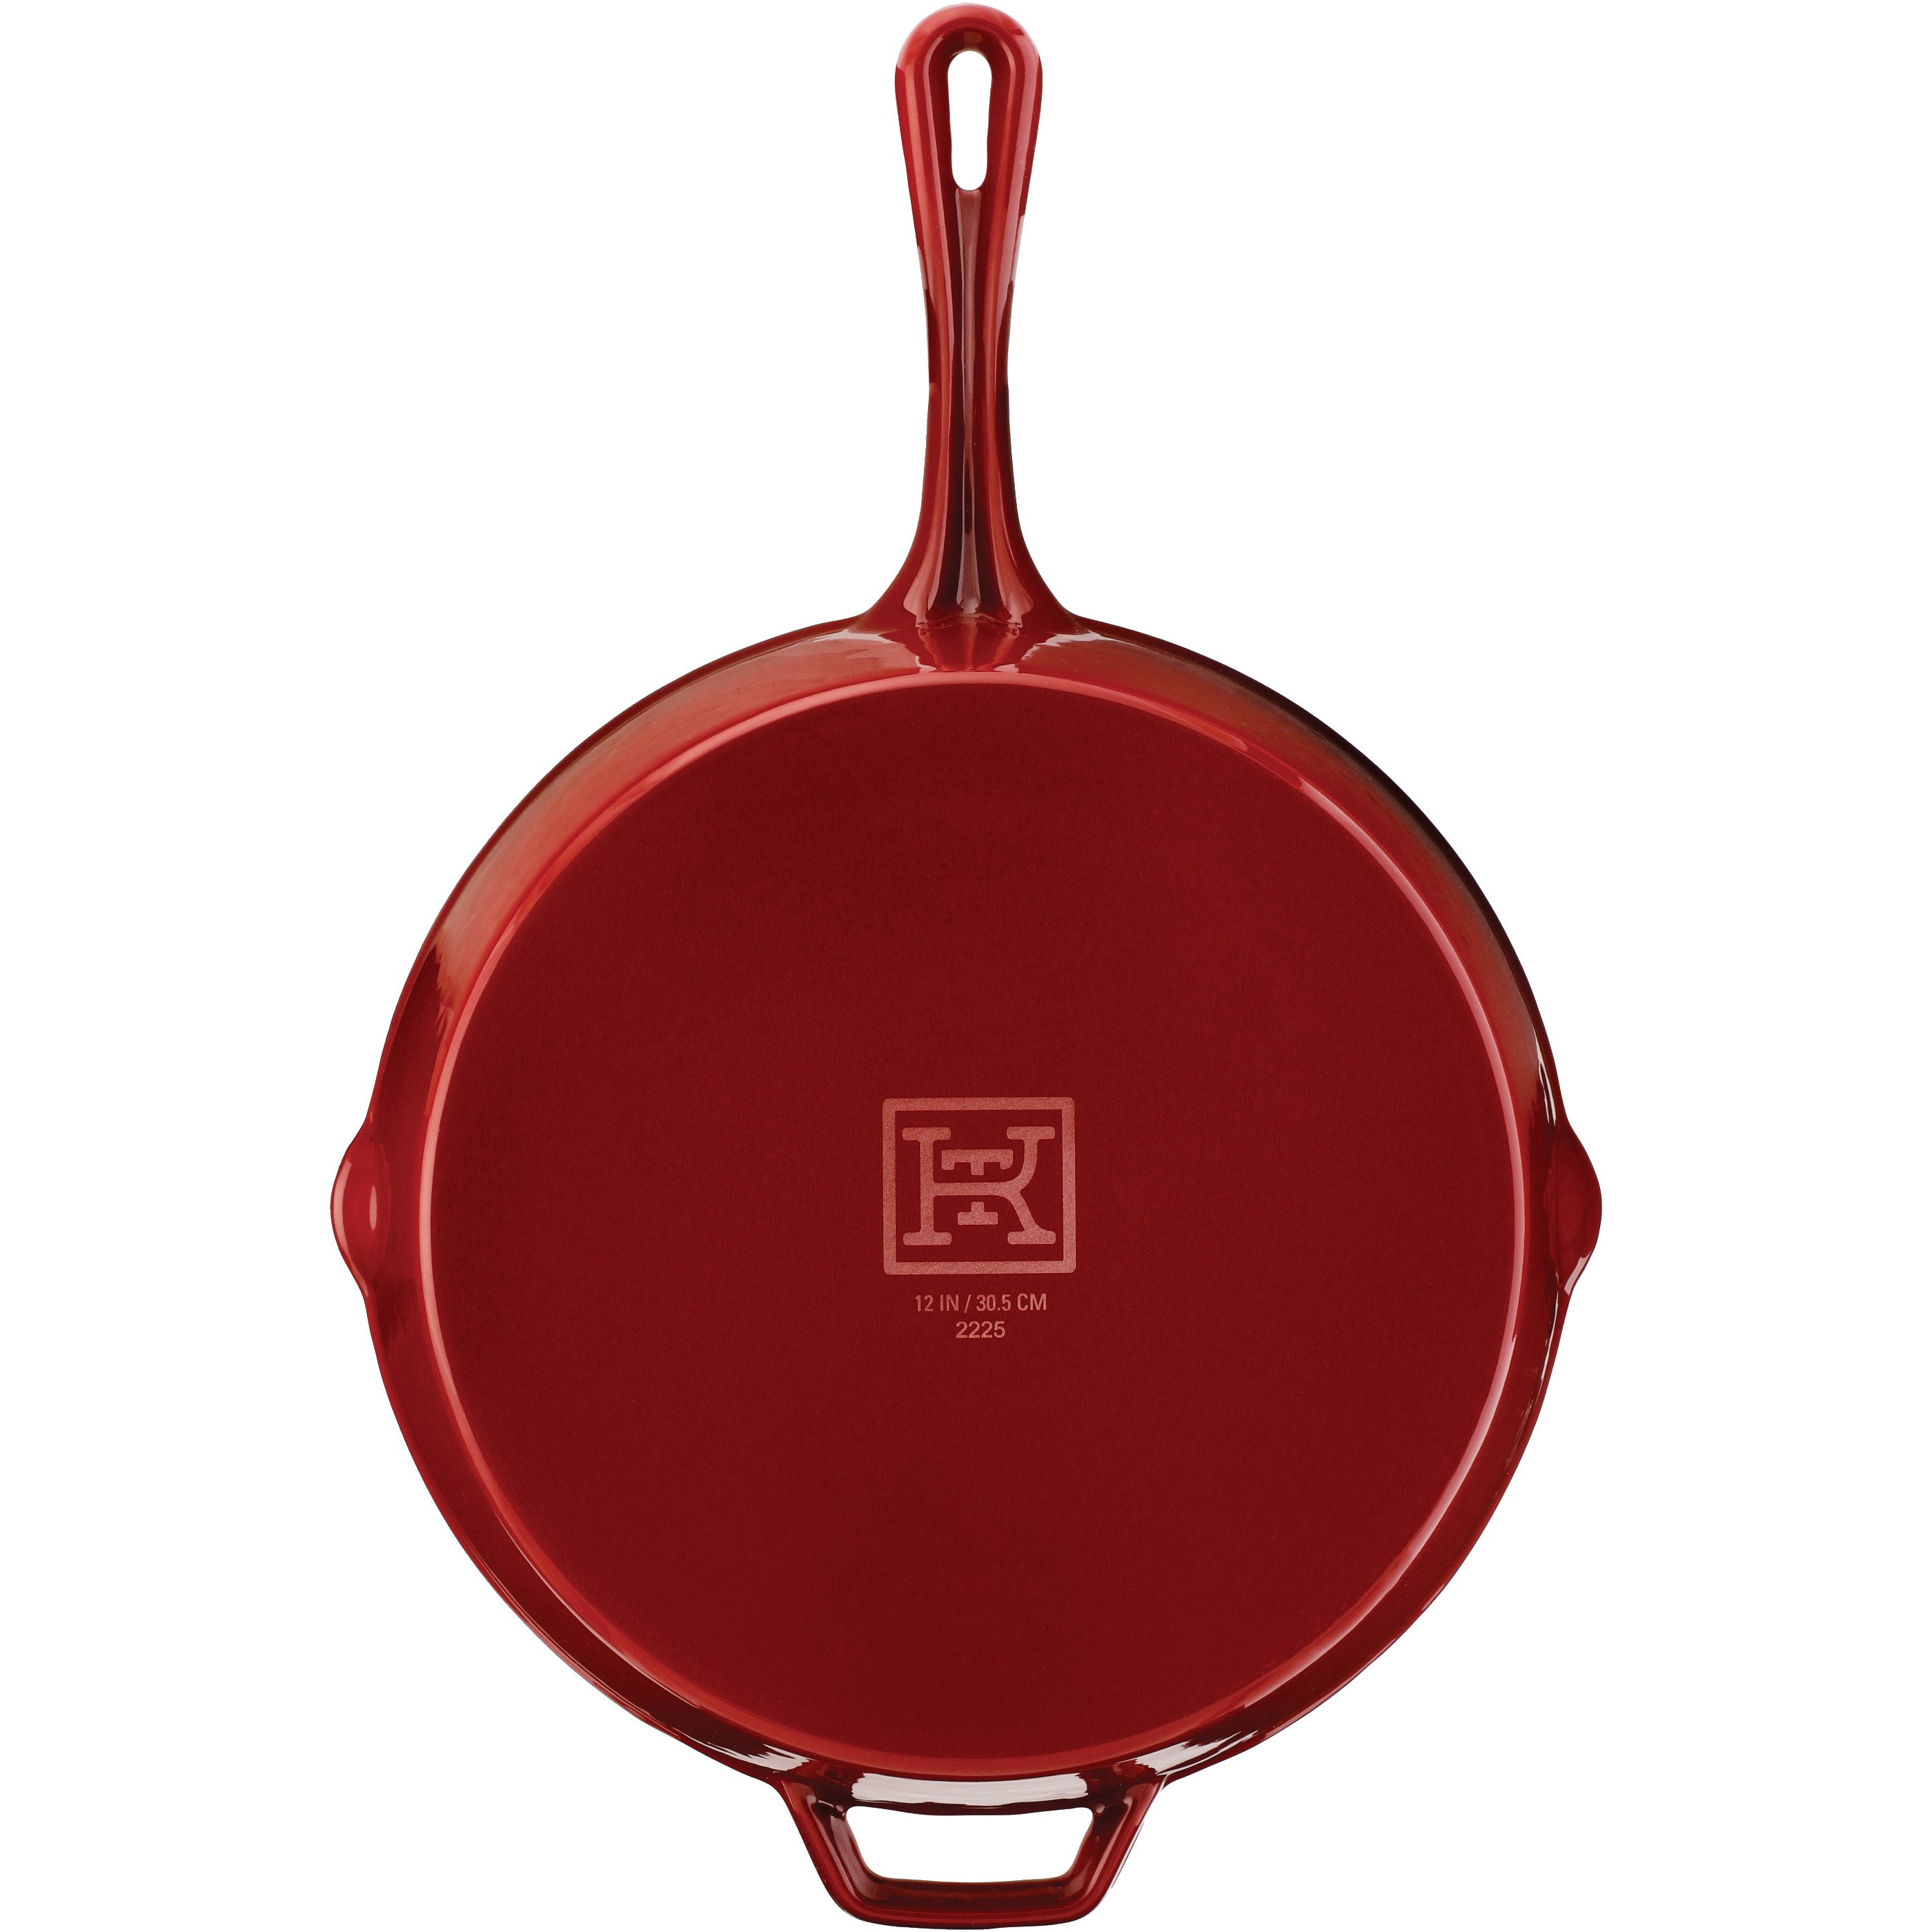 ExcelSteel 3-Piece Cast Iron Skillet Set with Red Enamel Coating